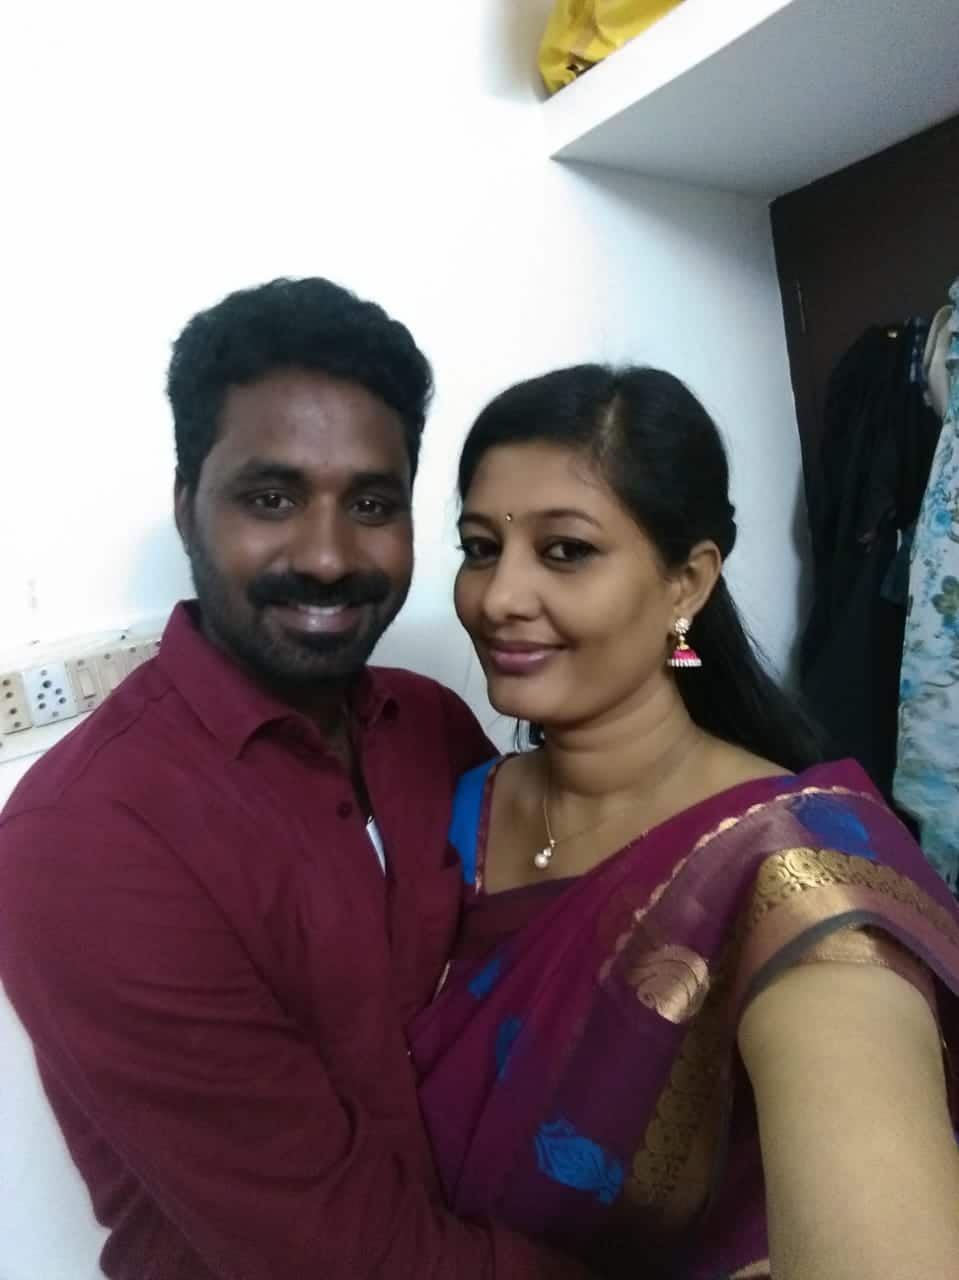 Tamil Actress nilani with lover hot photos leaked Boyfriend commit suicide